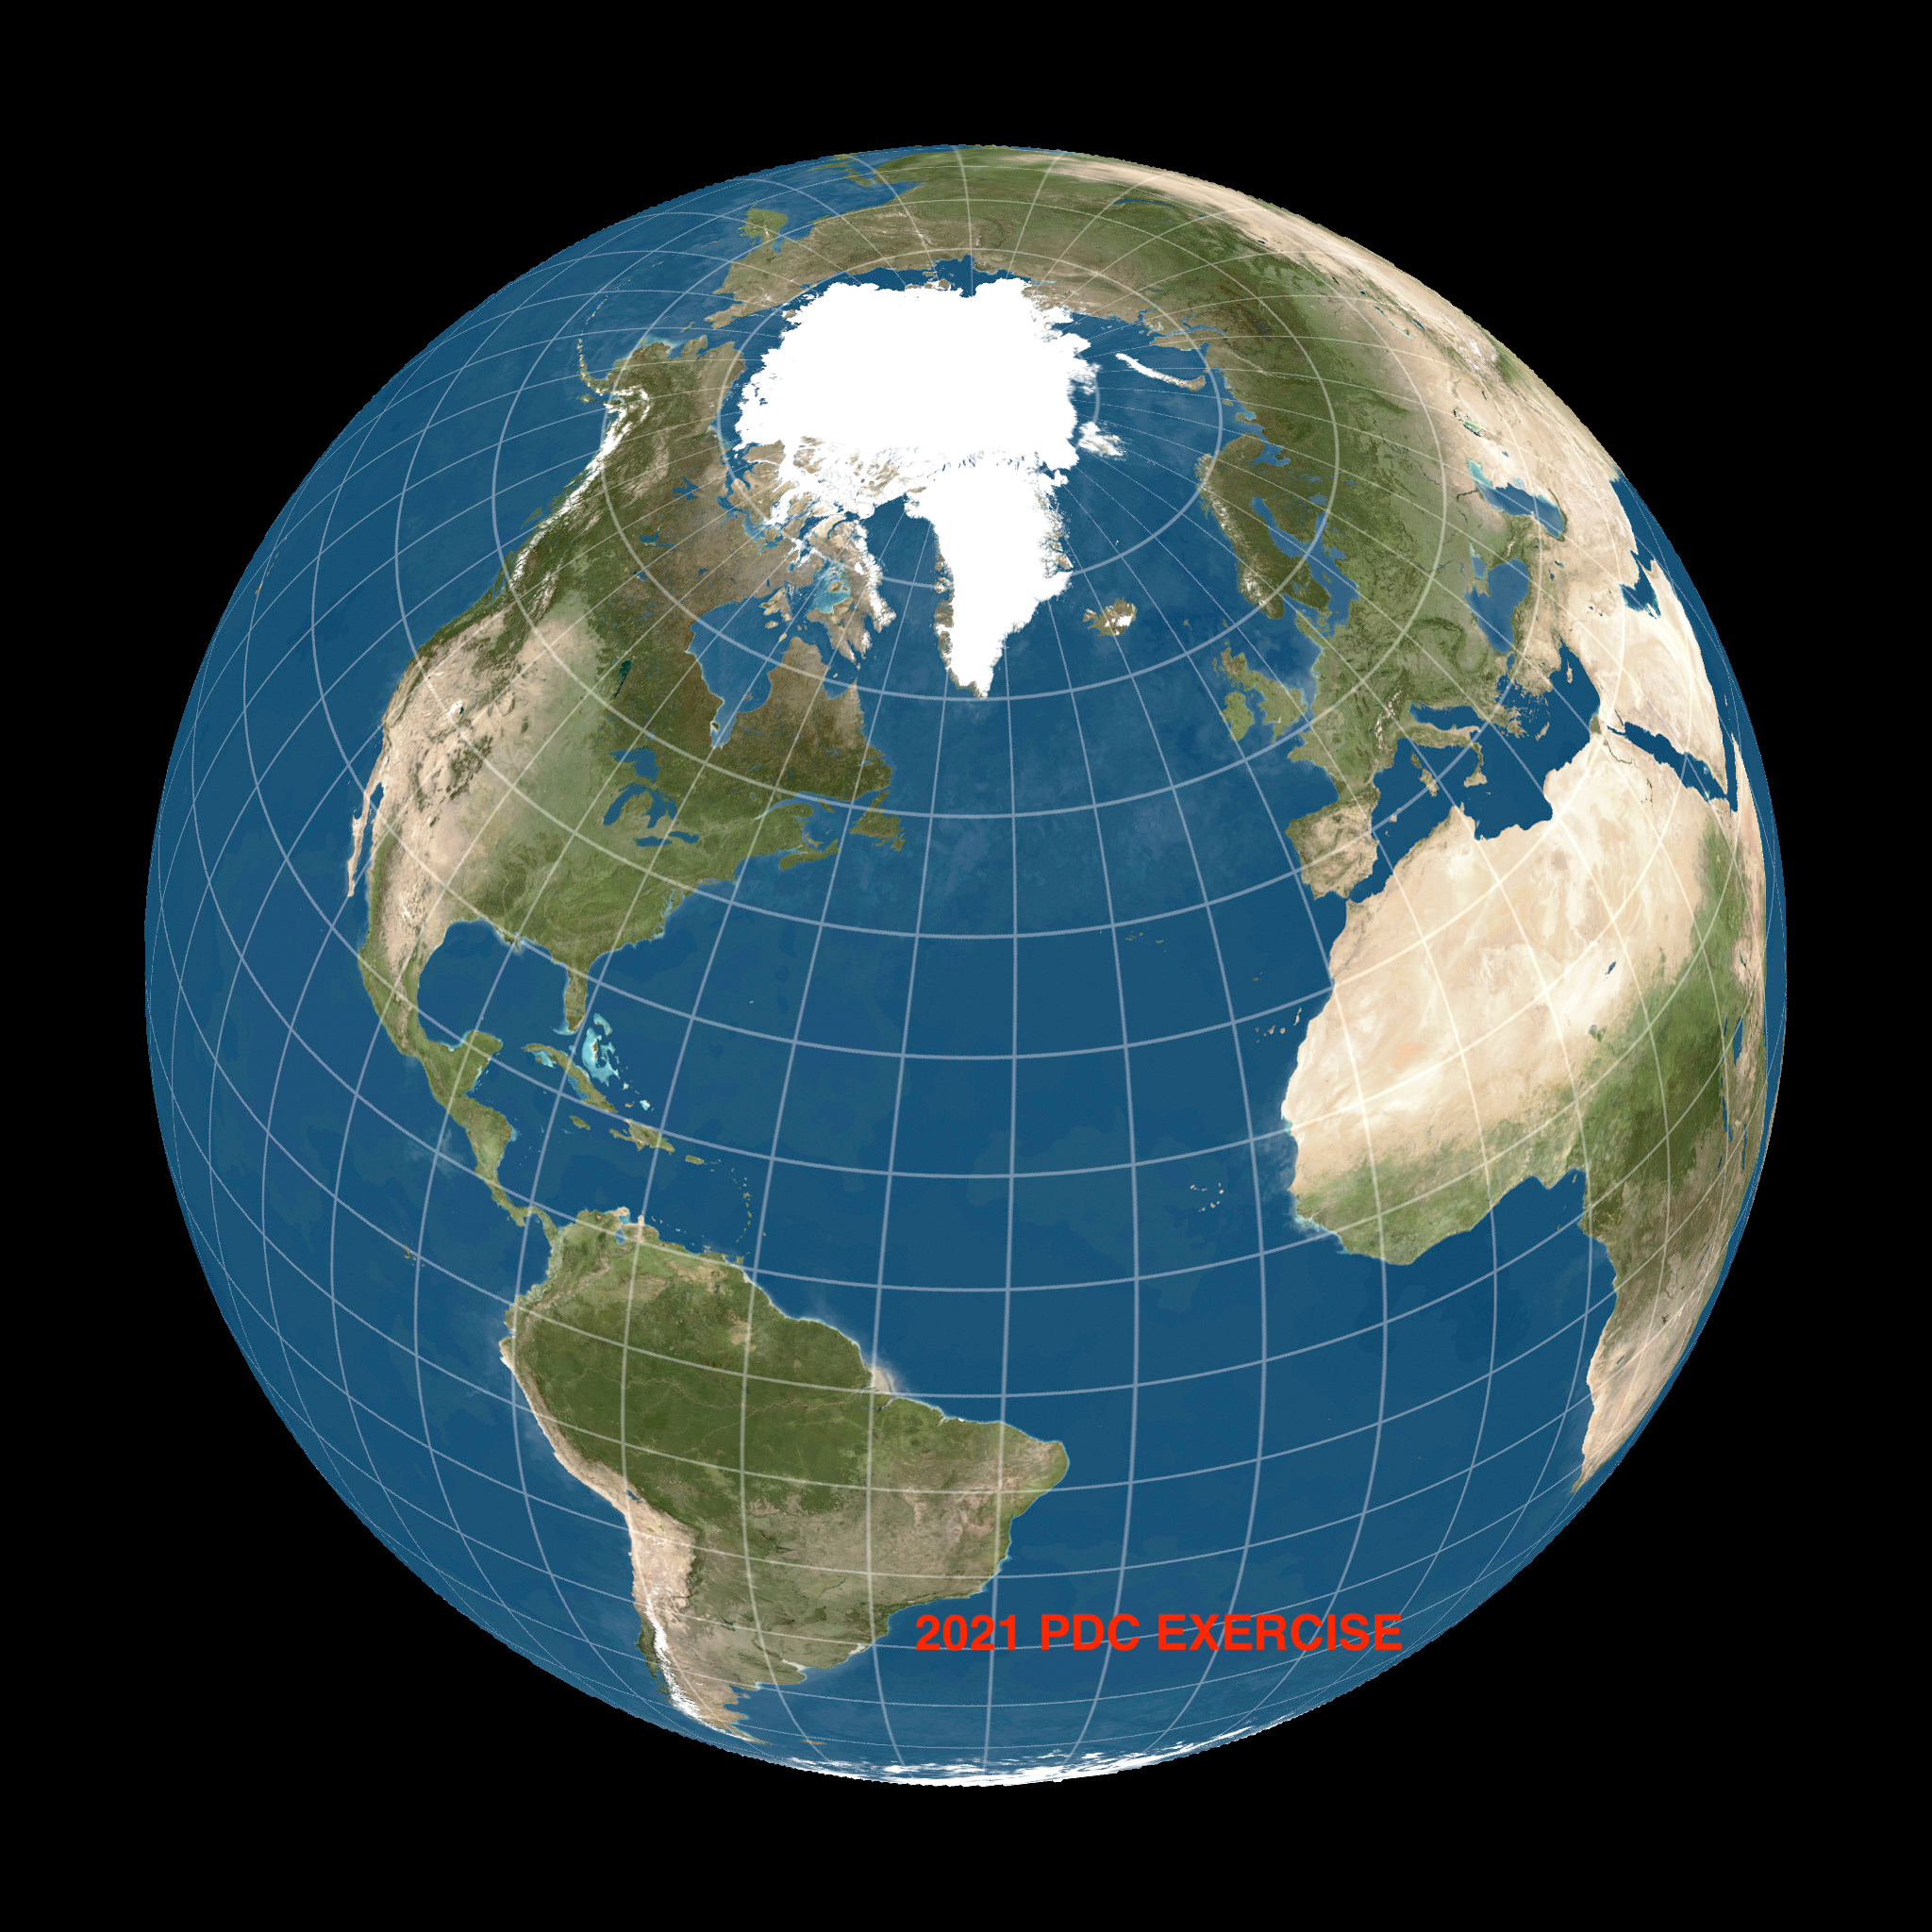 Earth surface projected into the b-plane of 2021 PDC